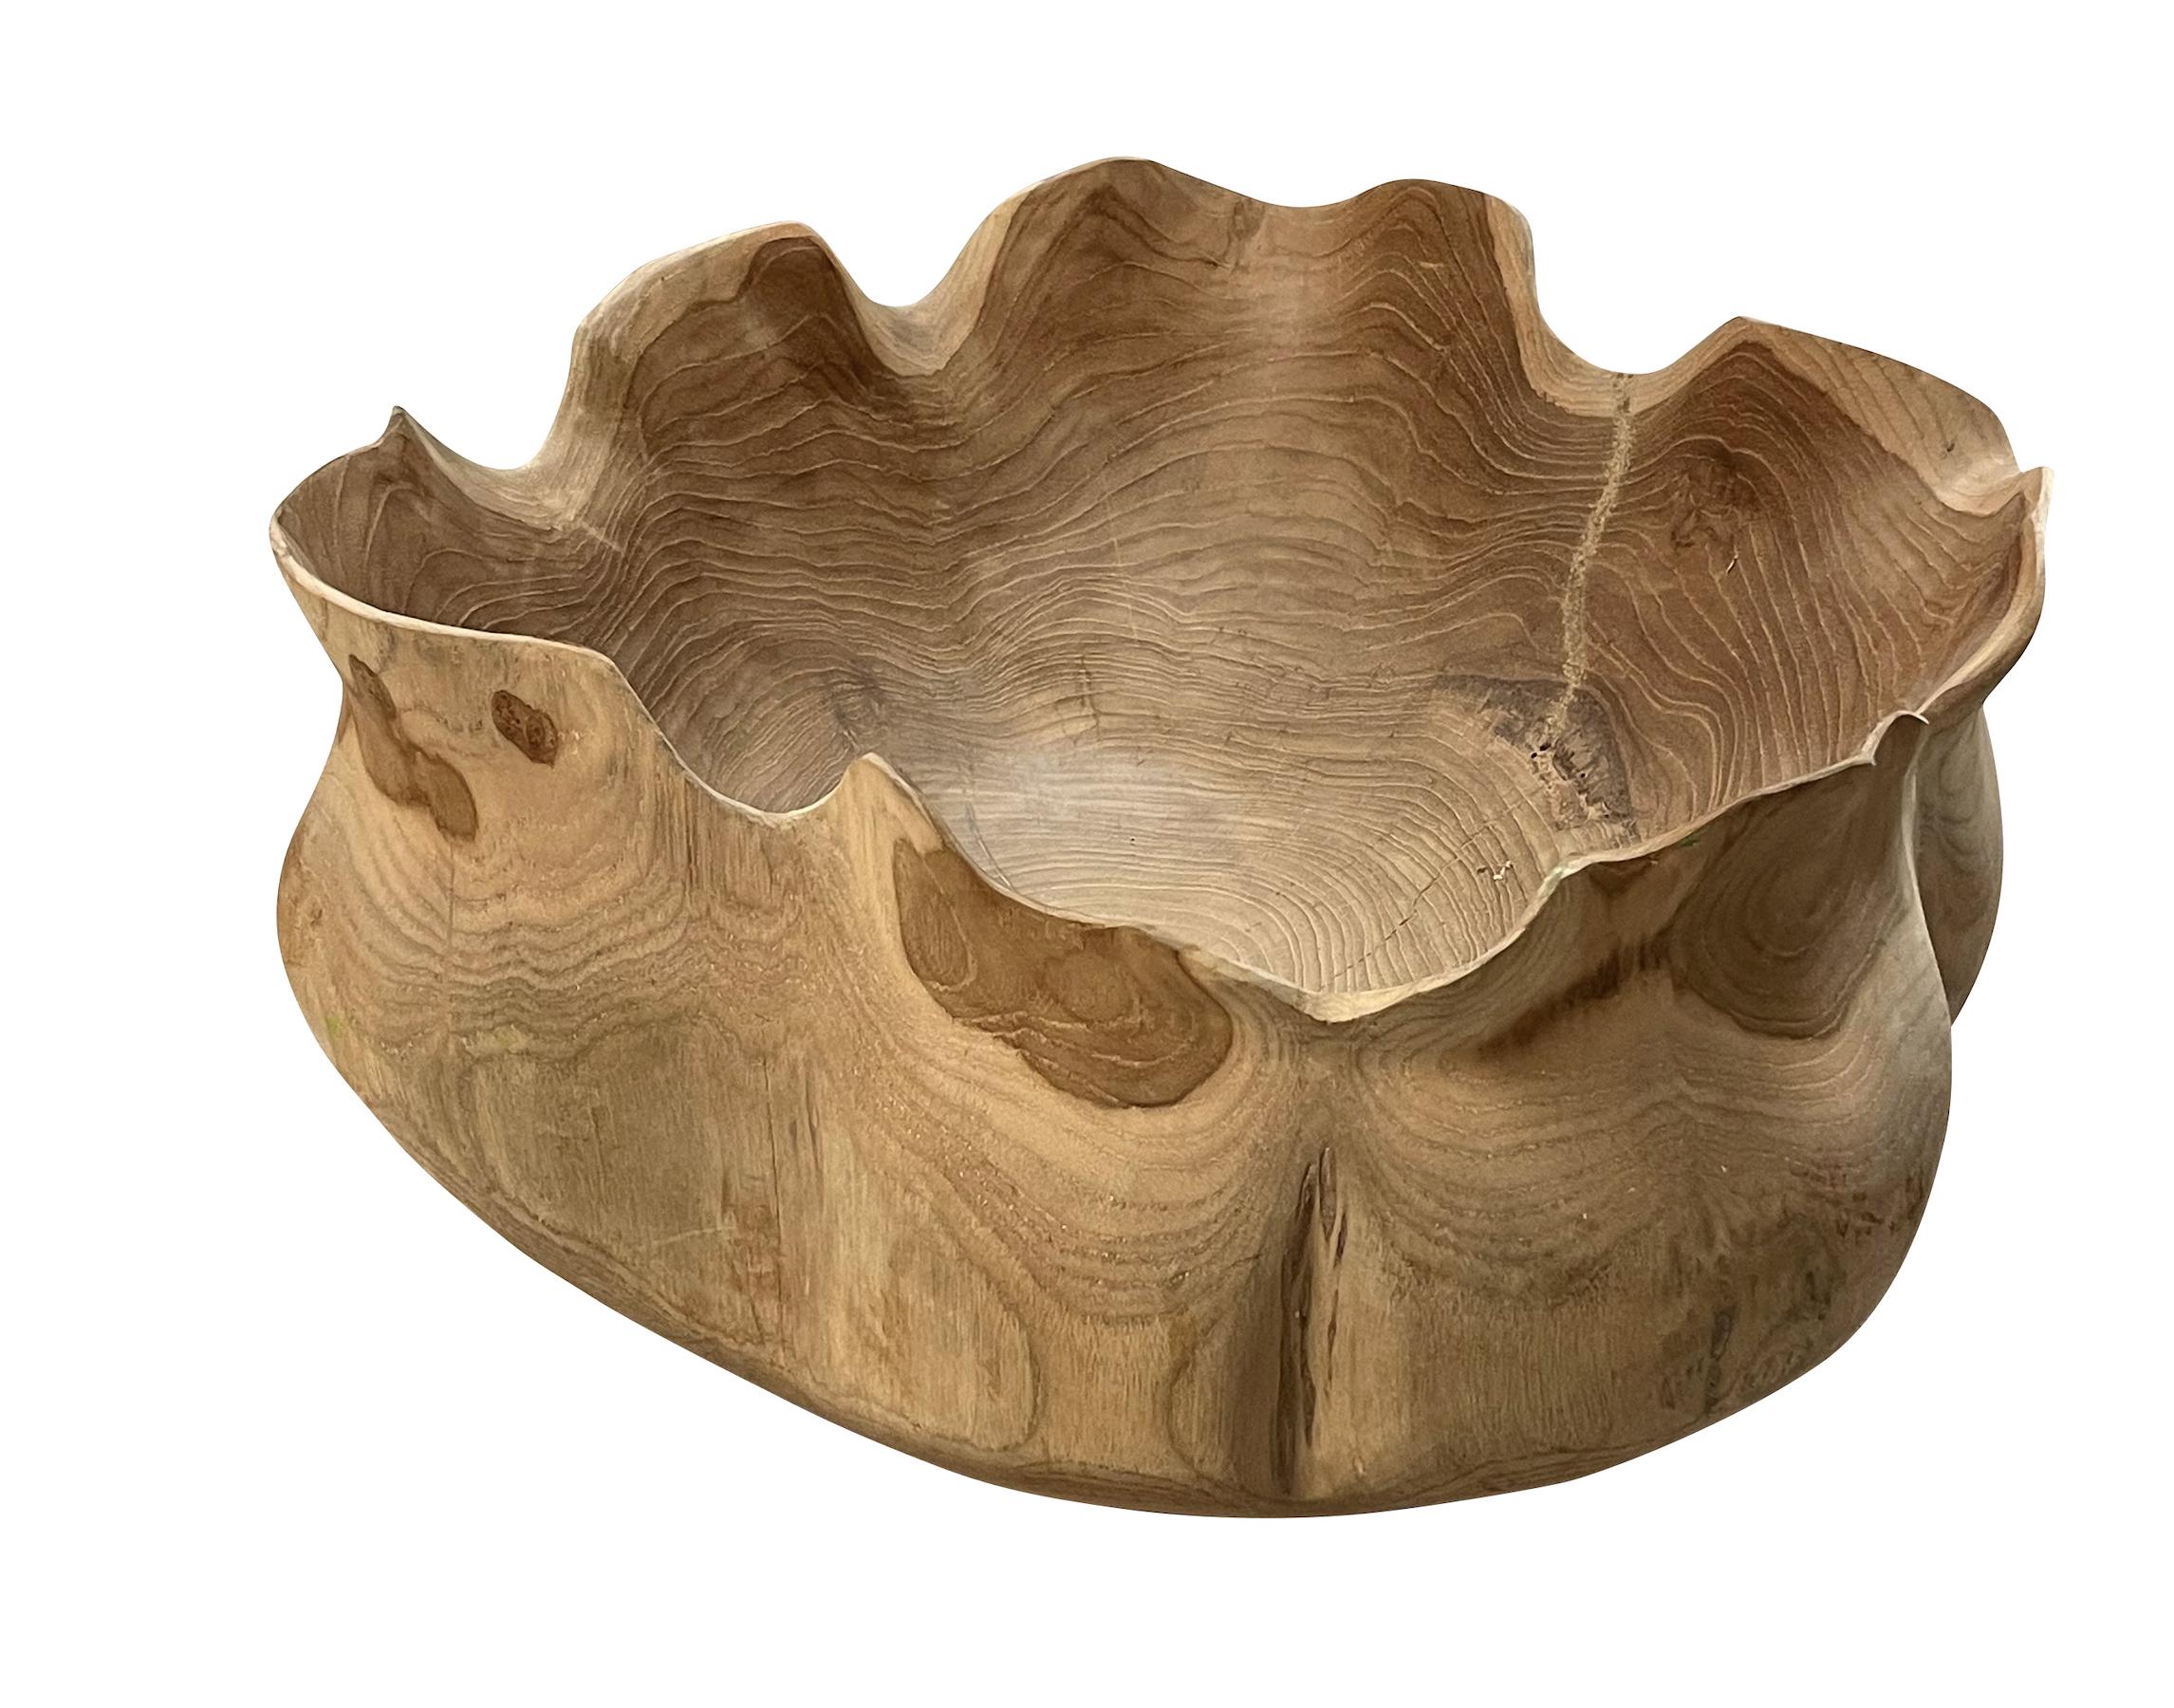 Contemporary Indonesian wooden bowl with free form shape and scalloped edge.
